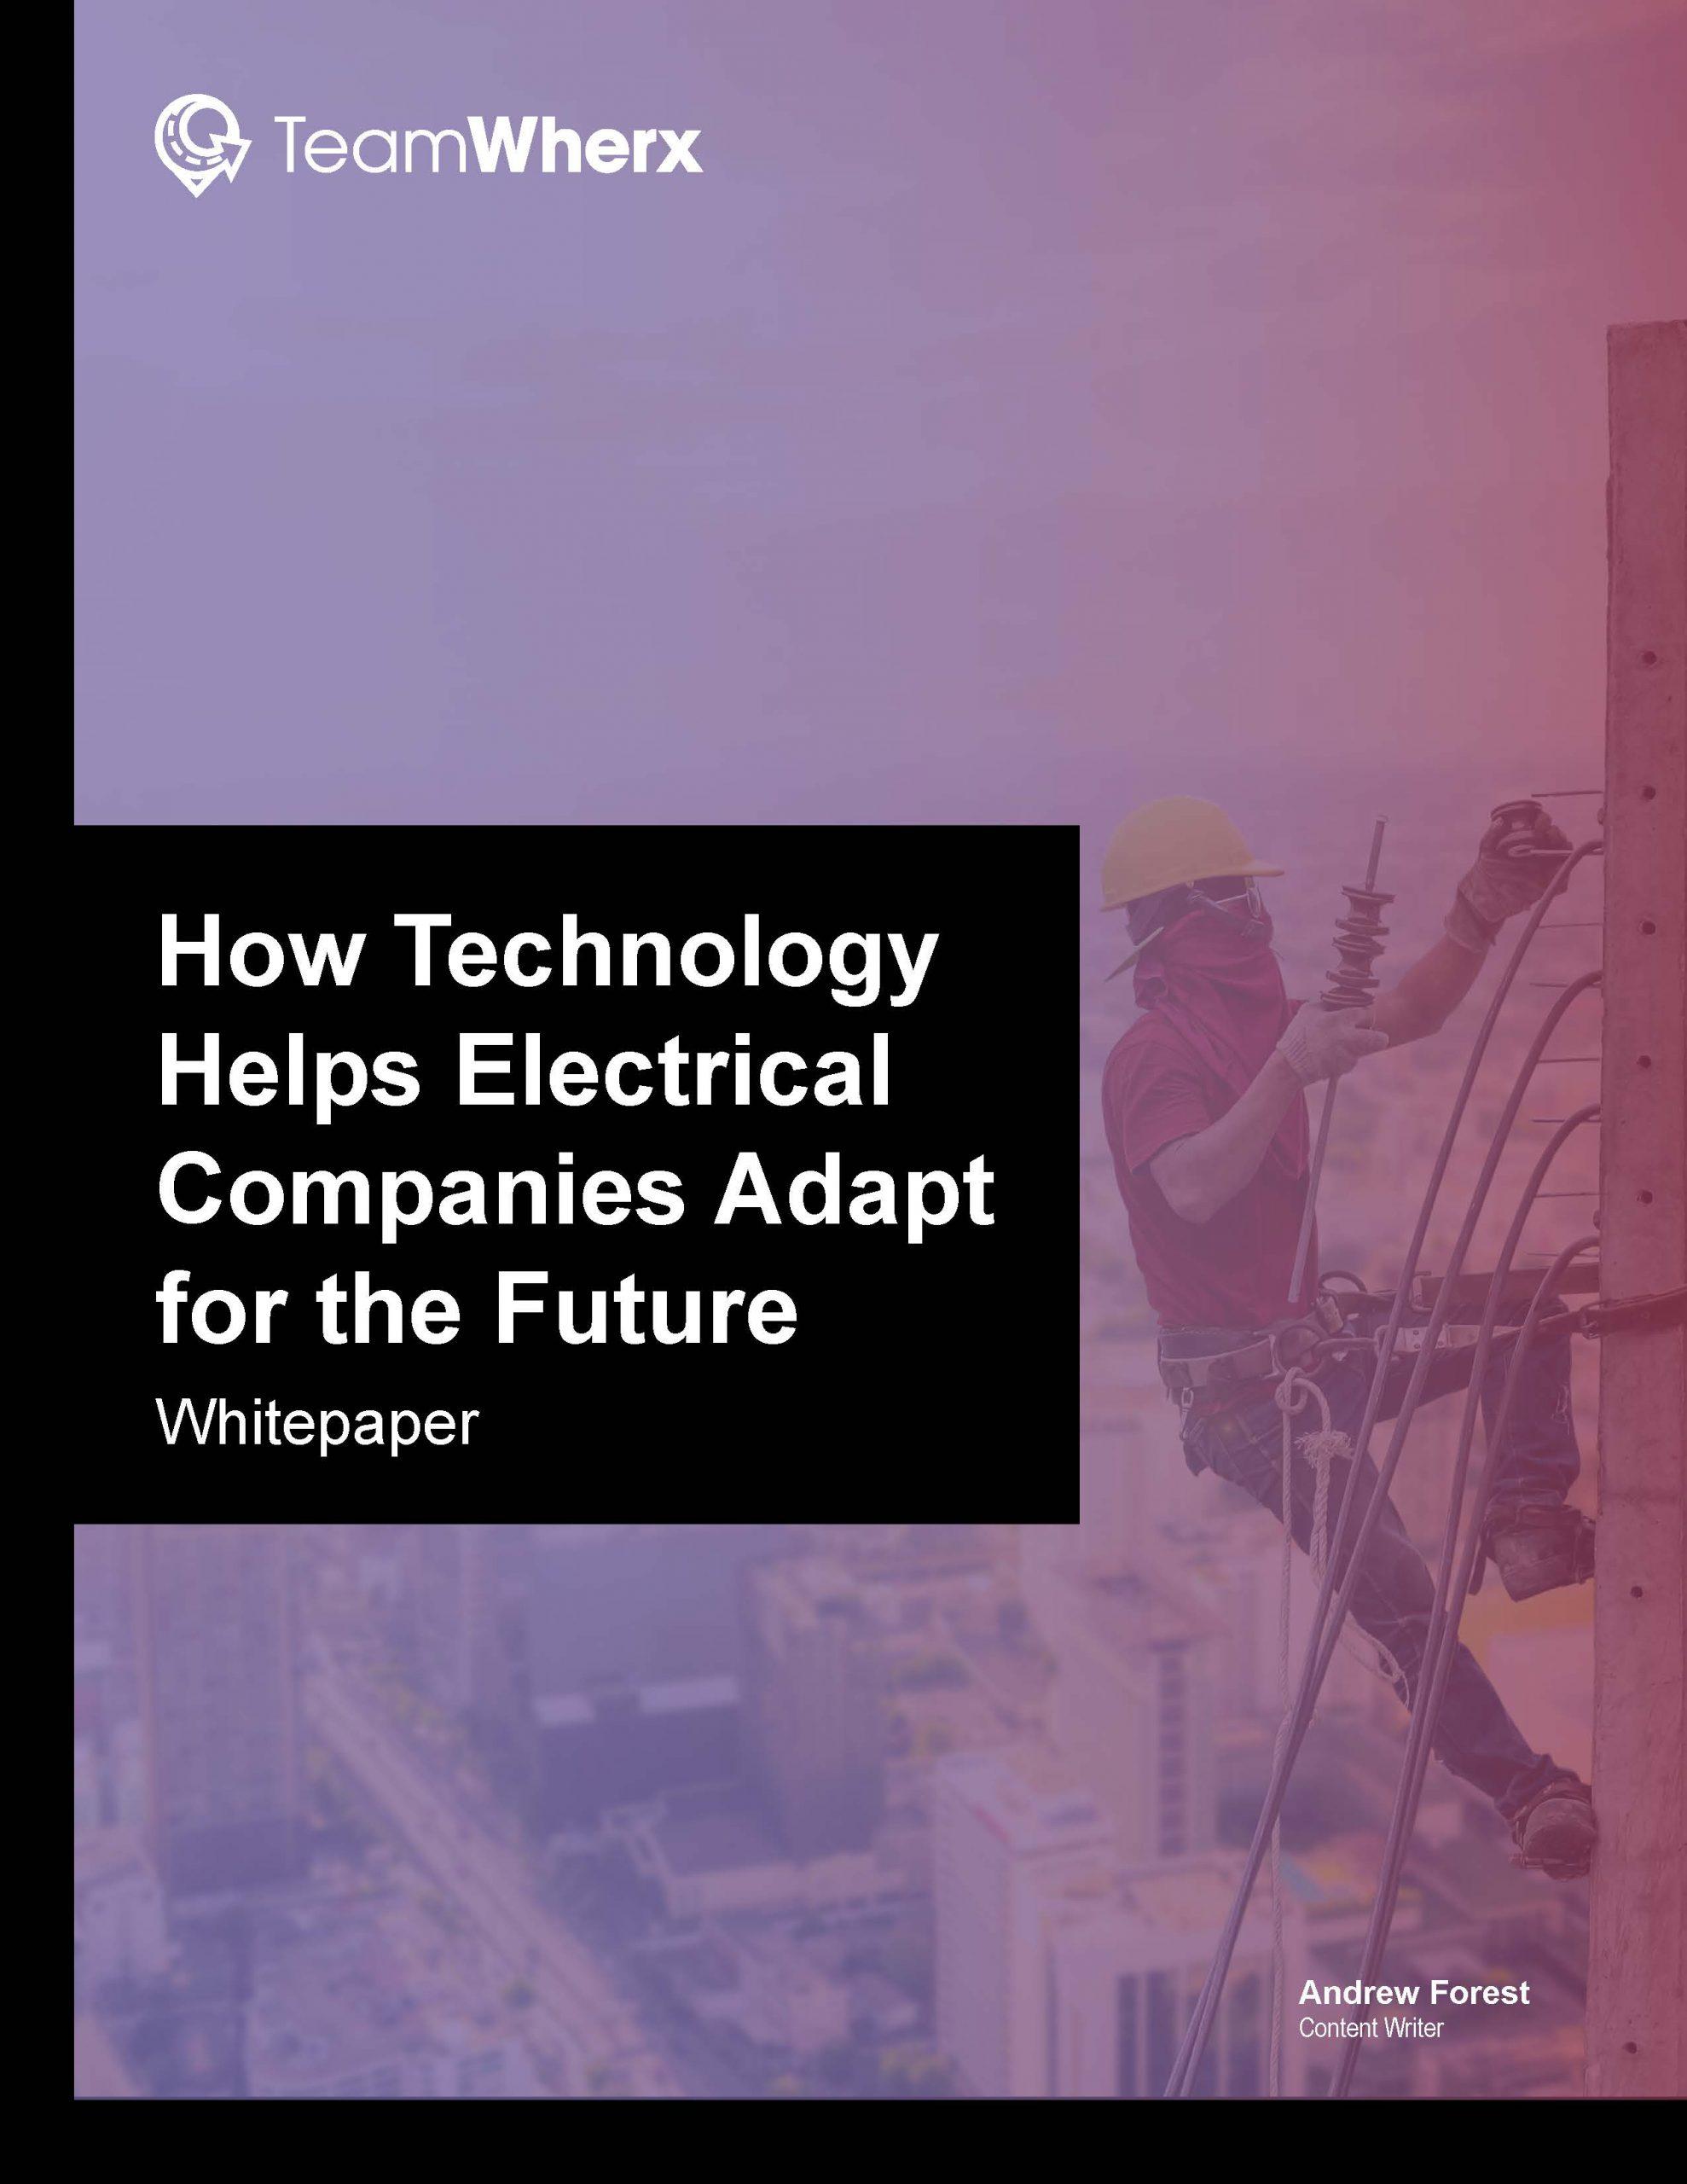 How Technology Helps Electrical Companies Adapt for the Future